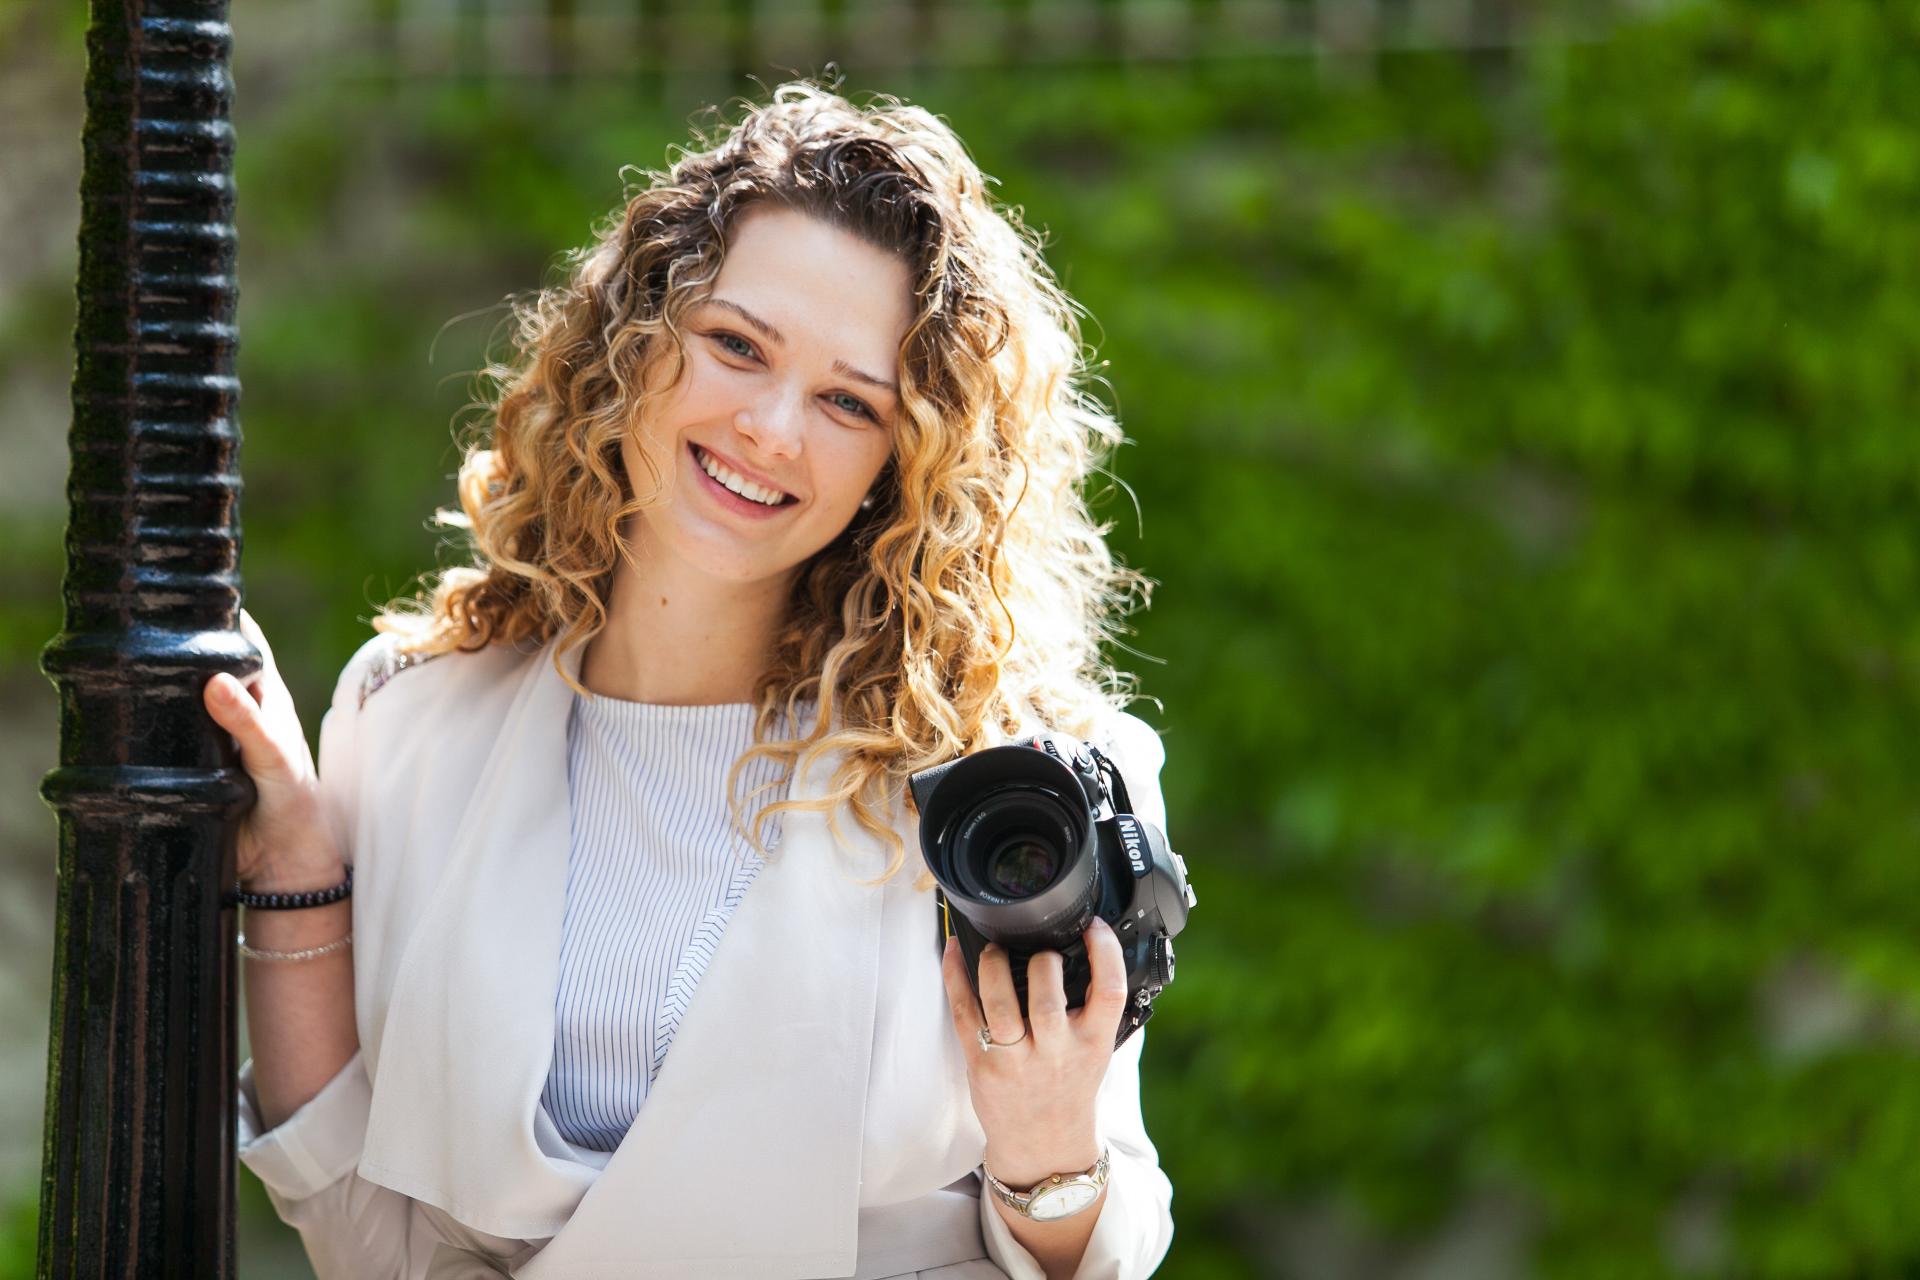 Is Your Headshot Keeping You From Being Booked? Tips and Examples for a Good Headshot